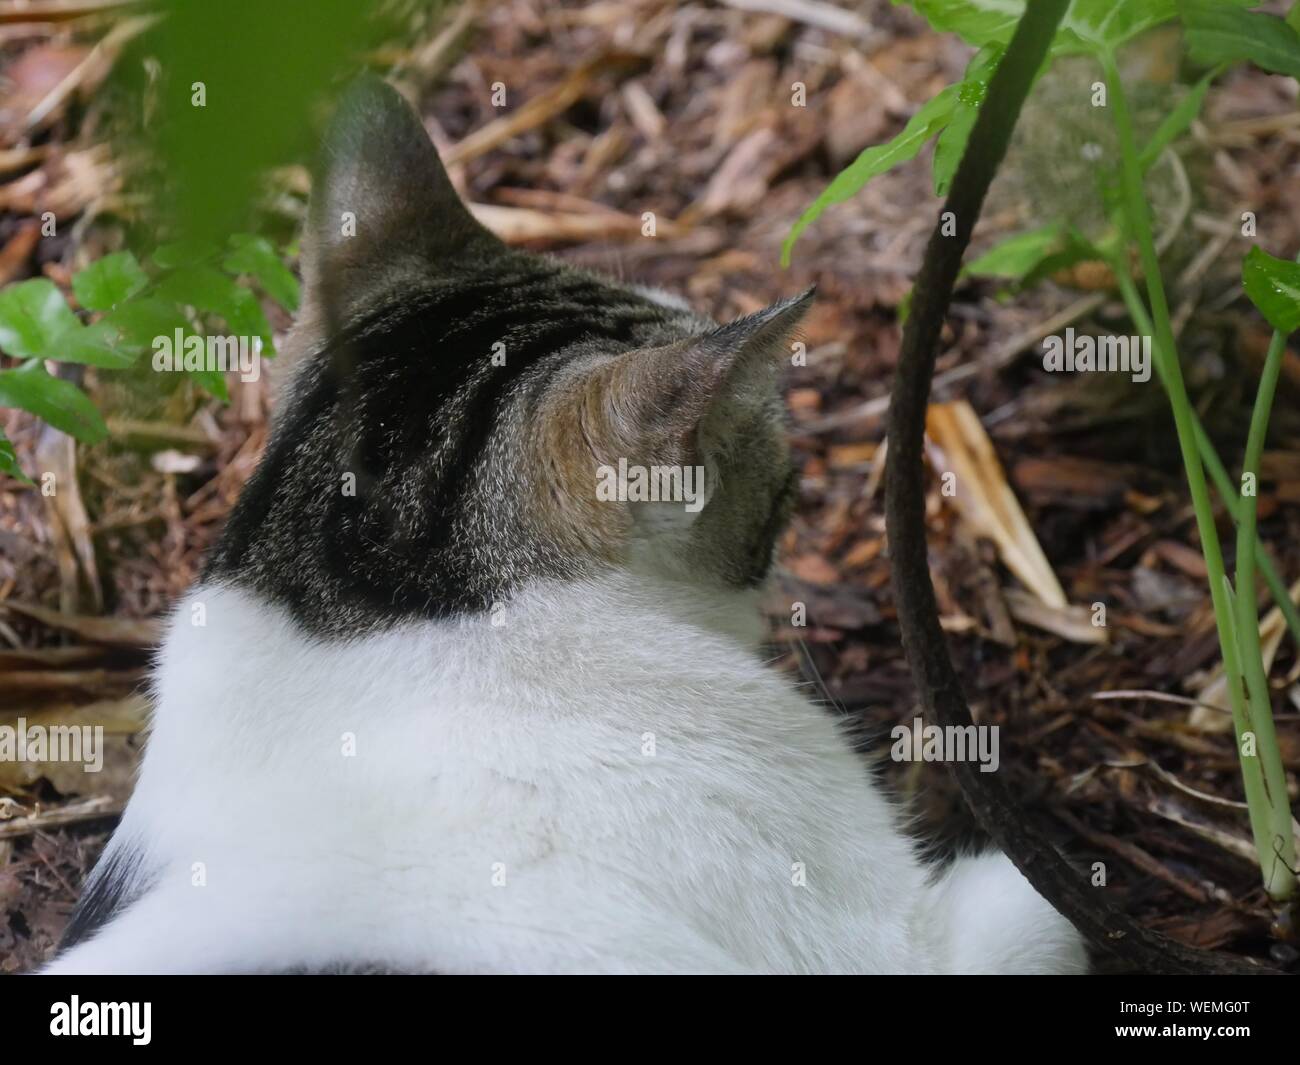 Back head shot of a black and white cat at the Hemingway gardens in Key West, Florida. Stock Photo